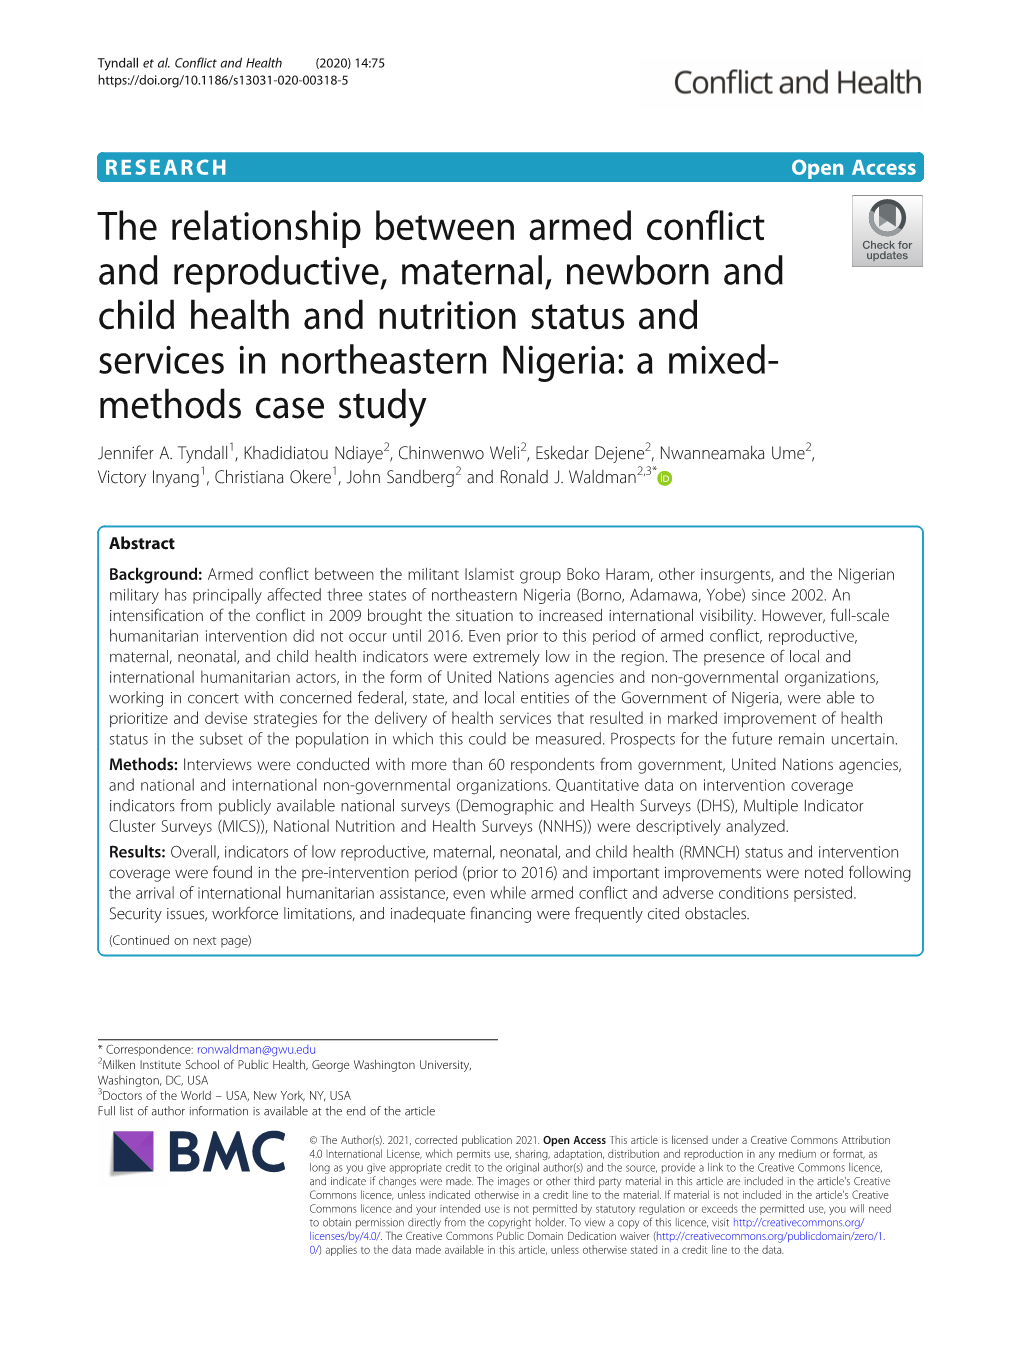 The Relationship Between Armed Conflict and Reproductive, Maternal